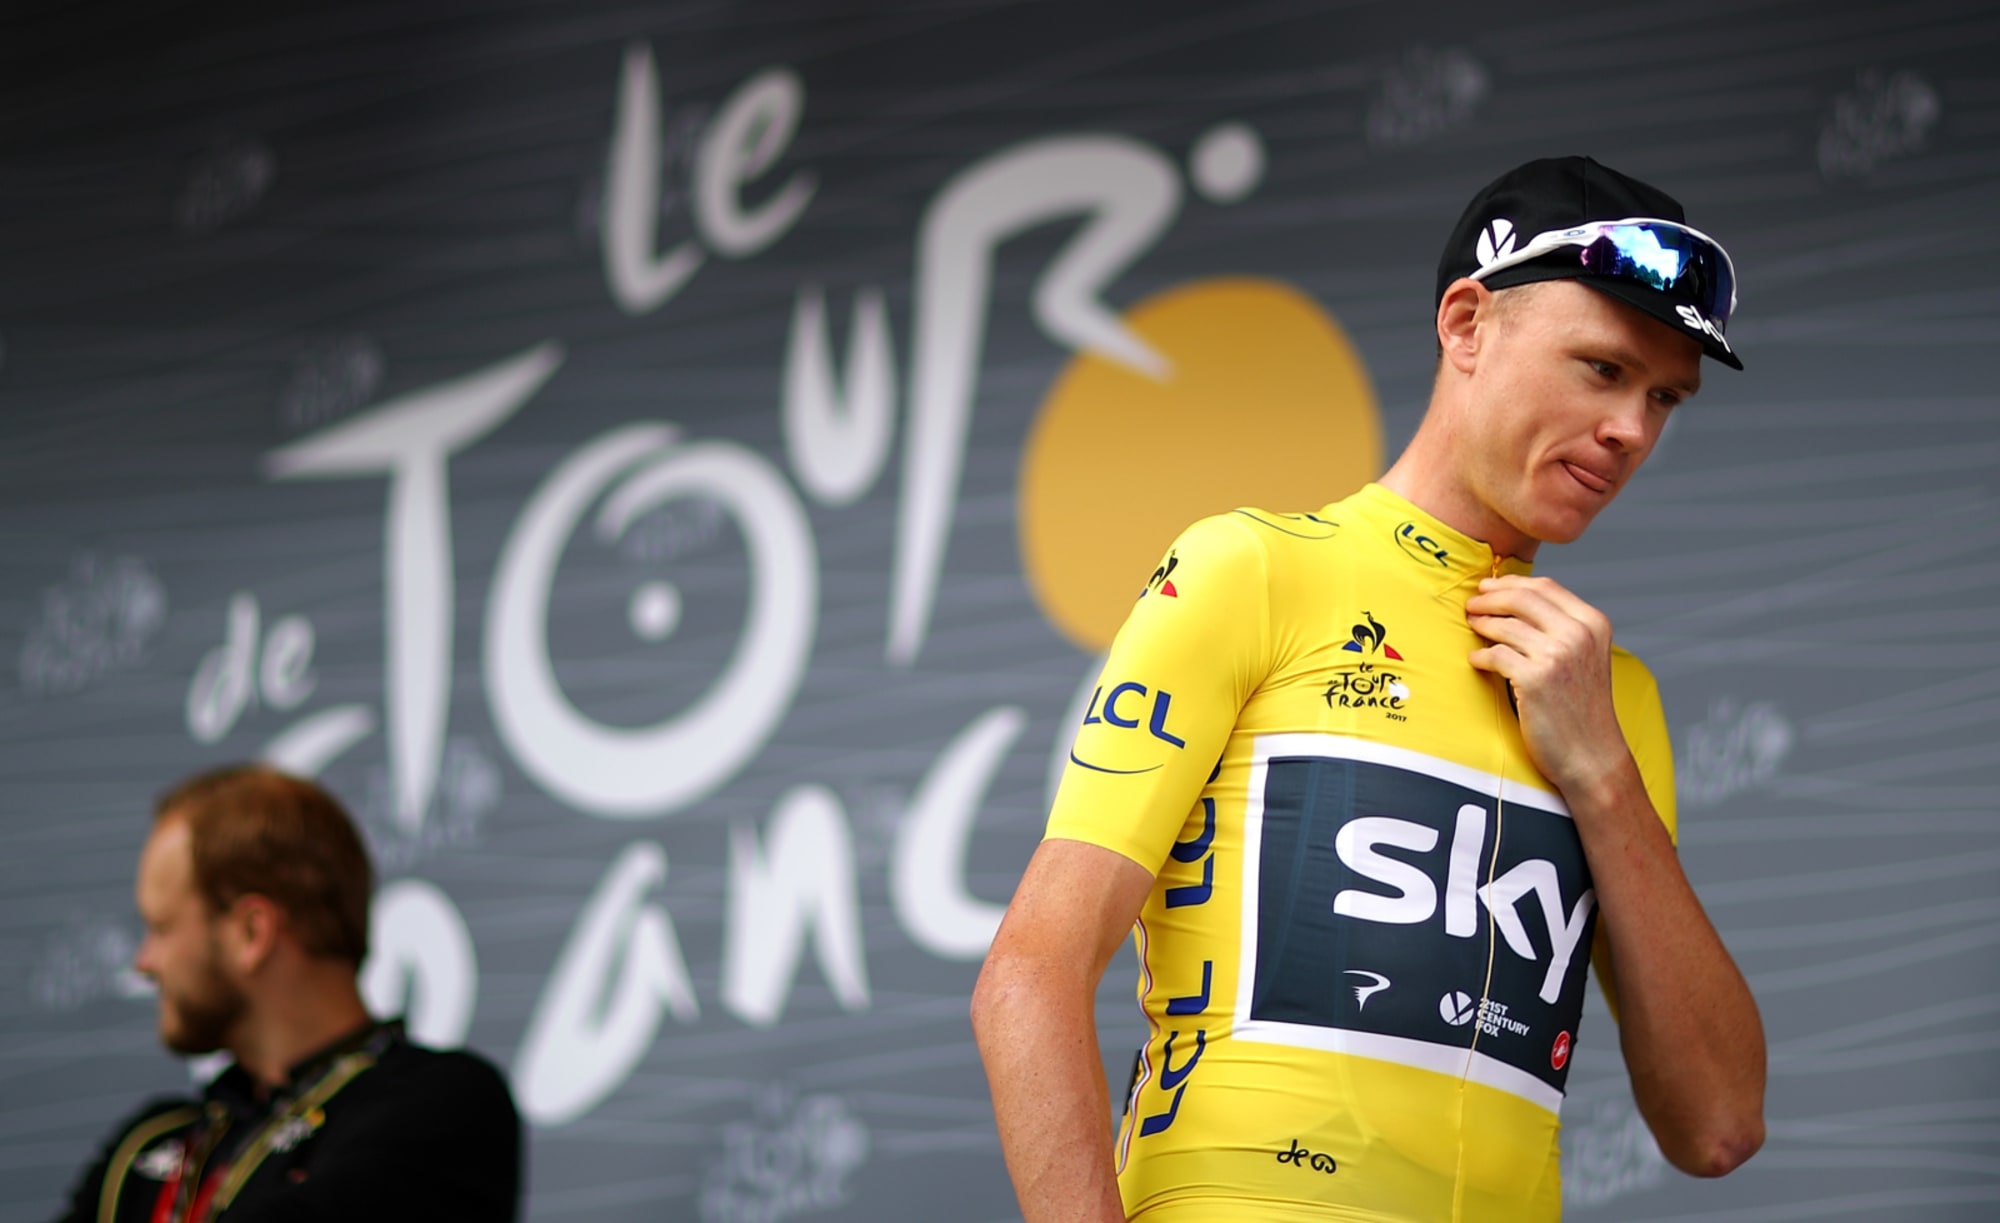 Tour de France 2018: of a problem is in cycling?